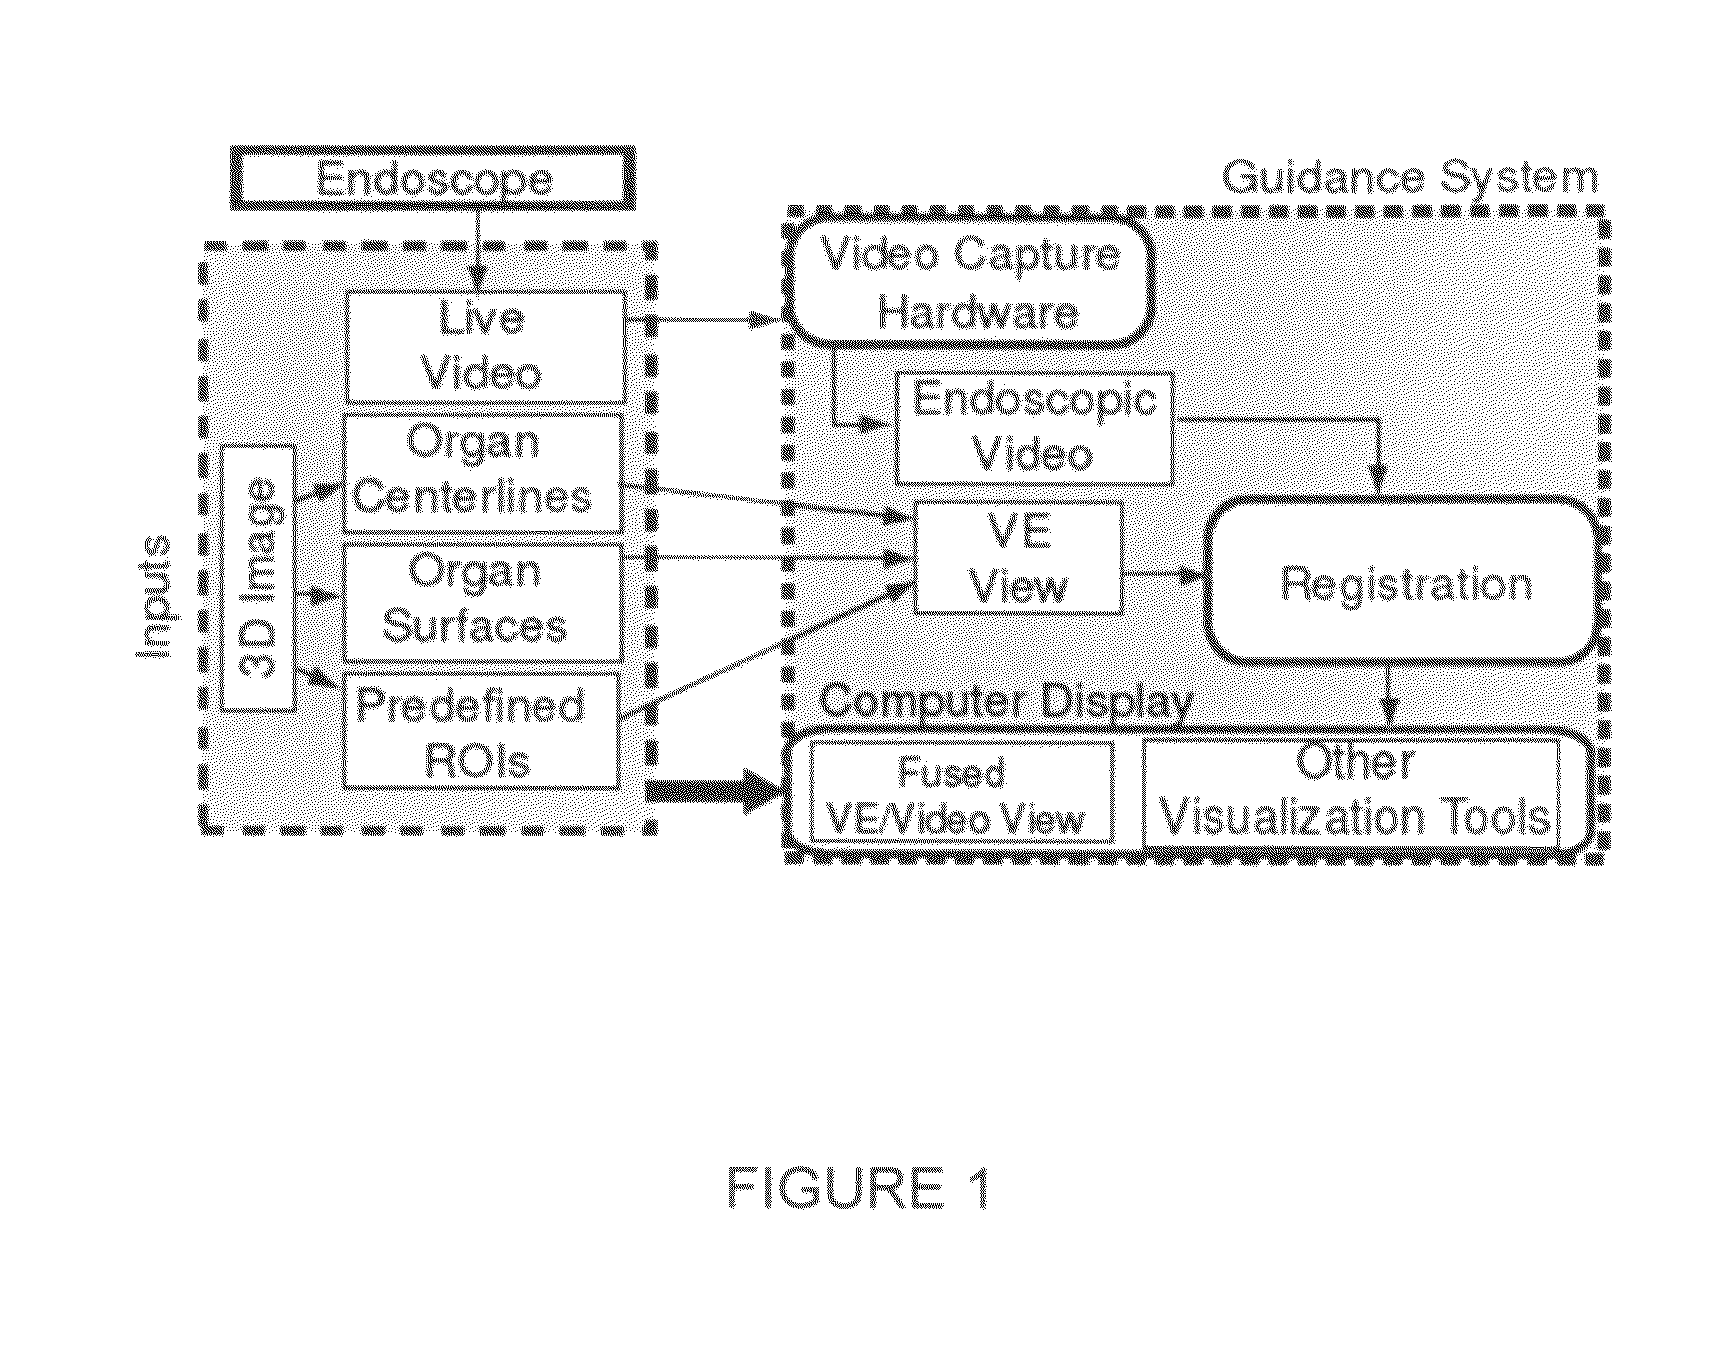 Method and apparatus for continuous guidance of endoscopy